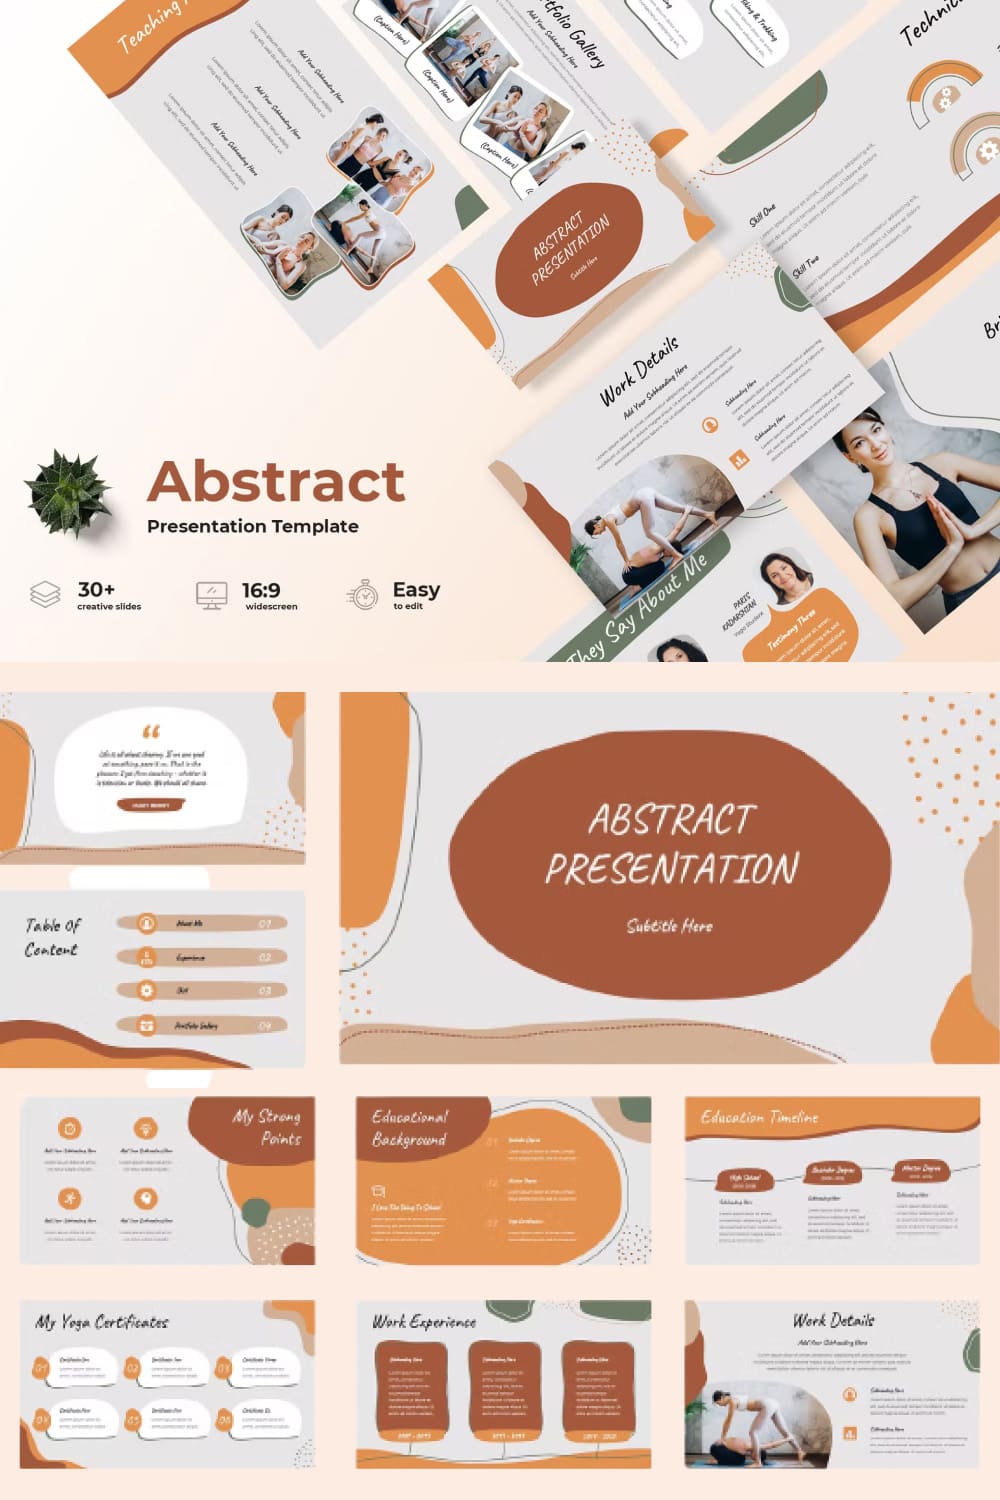 Abstract powerpoint presentation template - pinterest image preview.